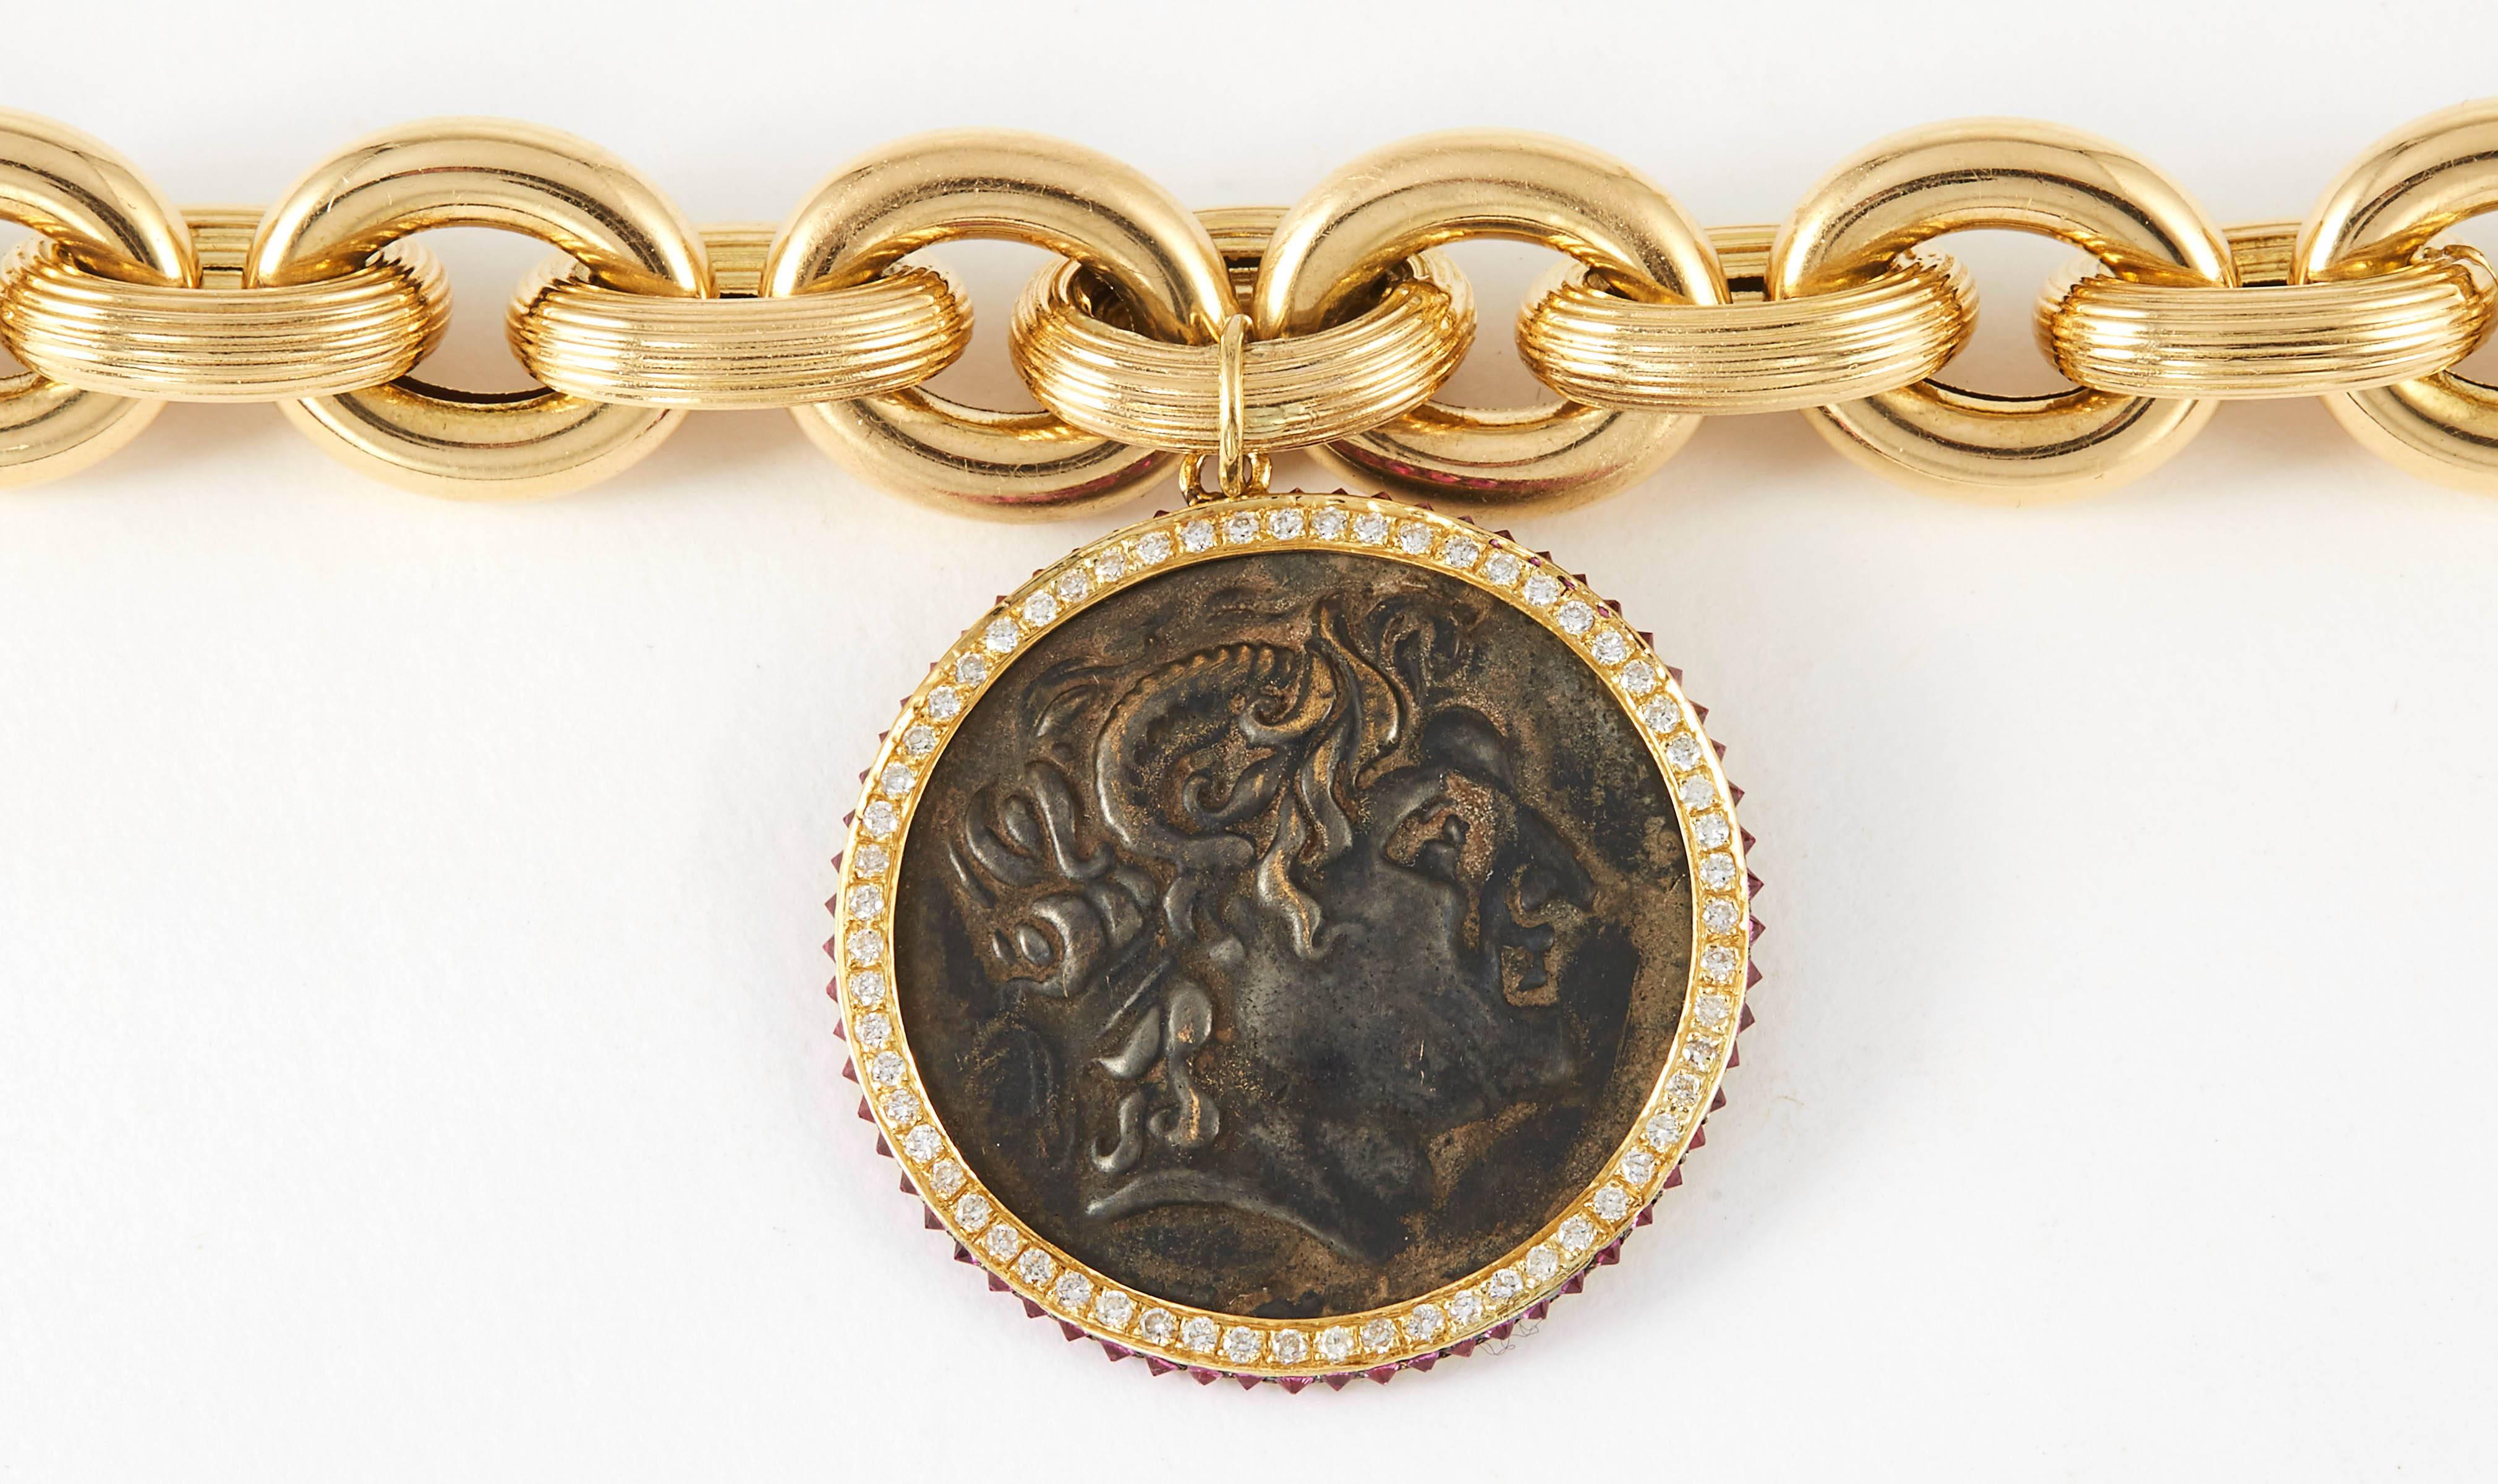 SAM.SAAB Ancient 15th century roman bronze coin with 1.05ct white diamonds and 1.17ct red spinel accents on a 18k yellow gold chain.